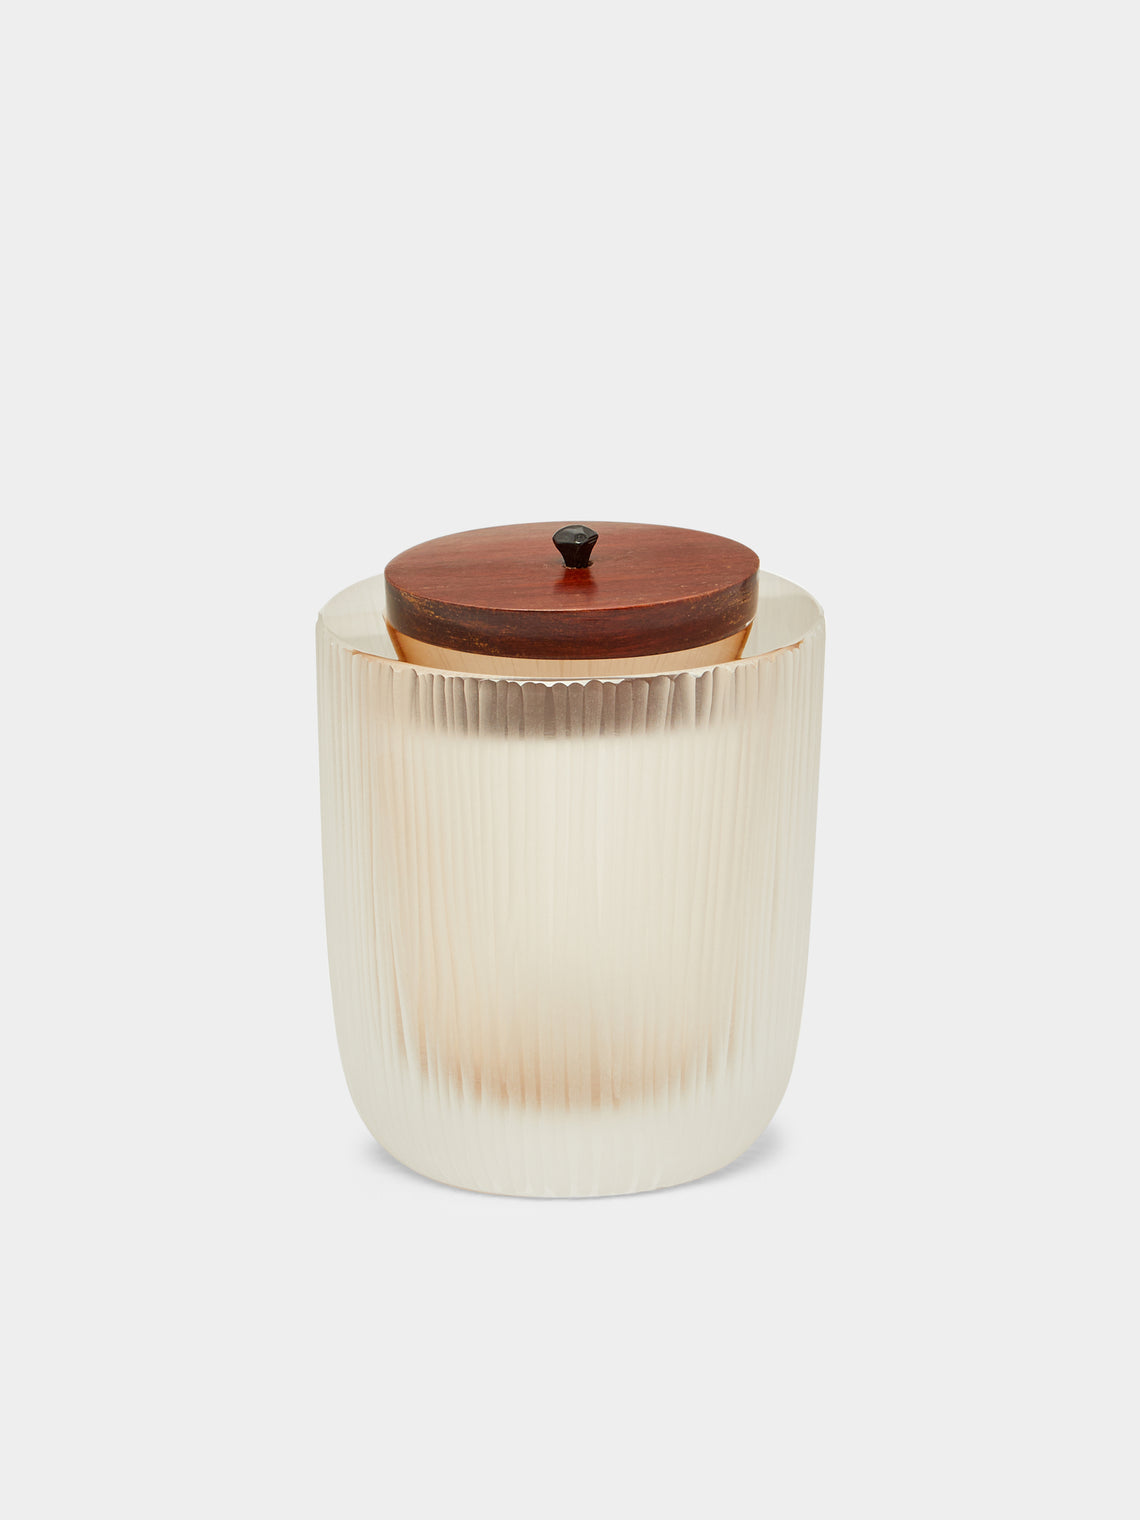 Yali Glass - Kasa Hand-Blown Glass Container with Wooden Lid -  - ABASK - 